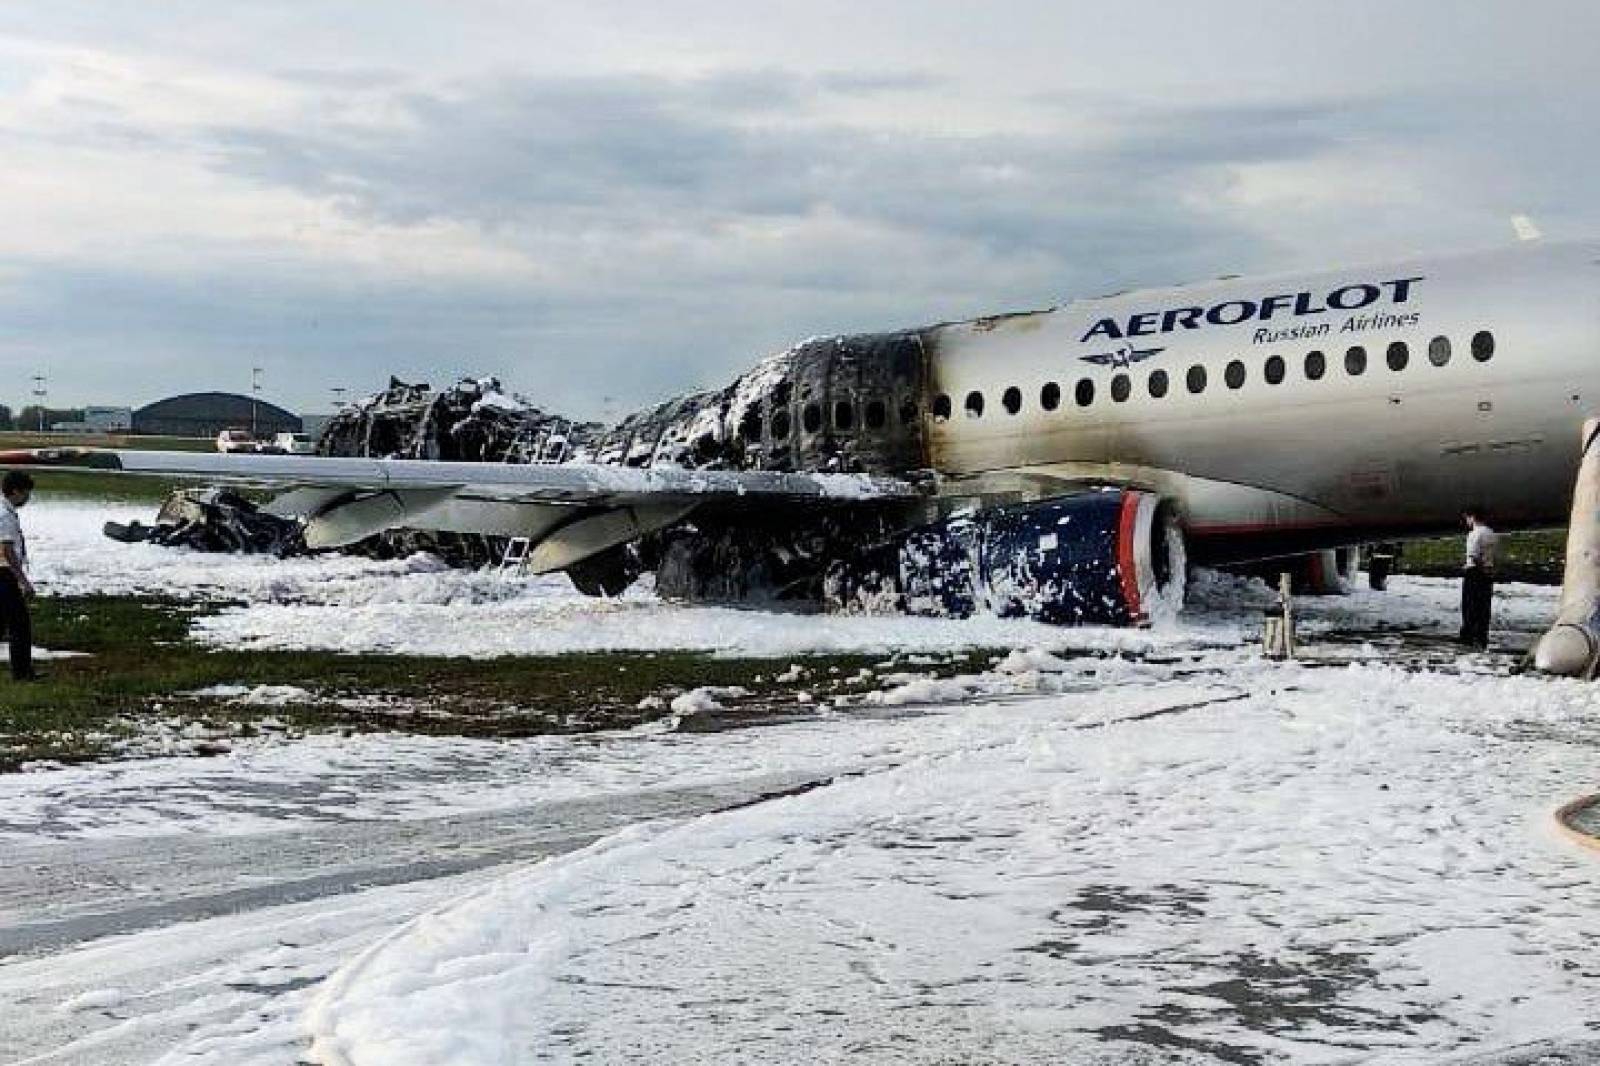 A view shows a damaged Aeroflot Sukhoi Superjet 100 passenger plane after an emergency landing at Moscow's Sheremetyevo airport